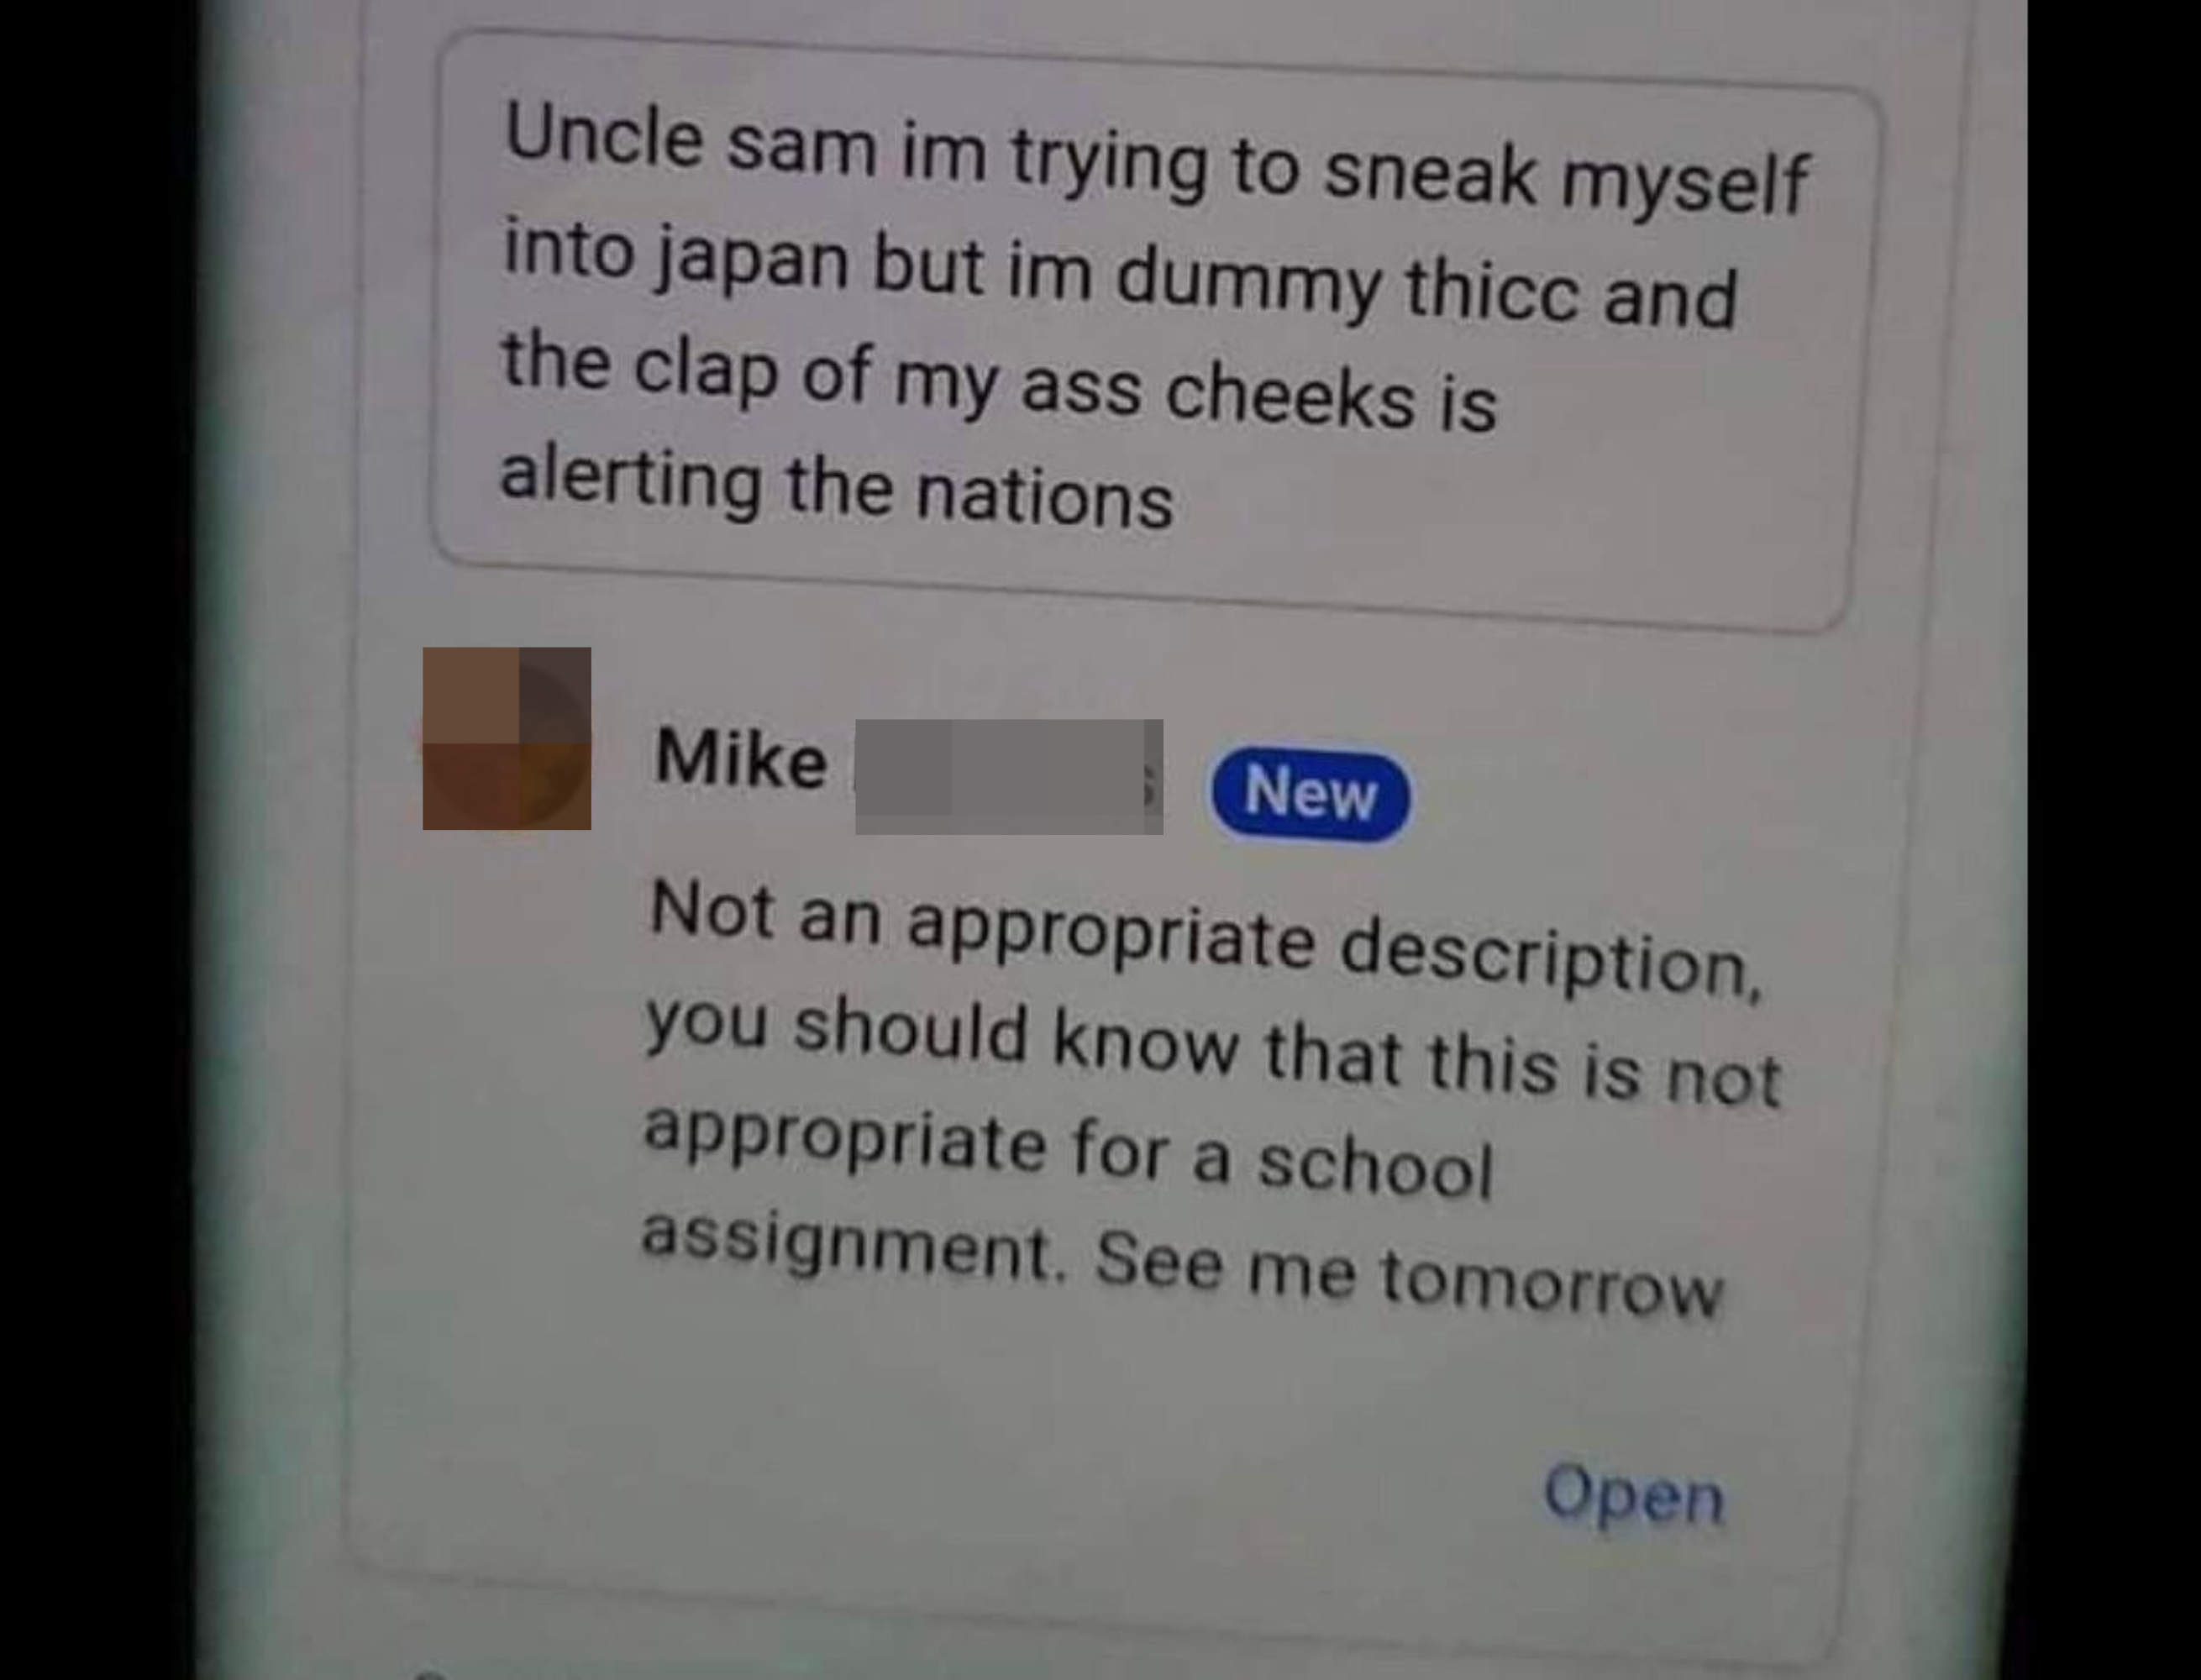 Student writes in Google doc, not knowing teacher can see it: &quot;Uncle sam im trying to sneak myself into japan but im dummy thicc and the clap of my ass cheeks is alerting the nations&quot;; teacher writes, &quot;This is not appropriate for an assignment&quot;